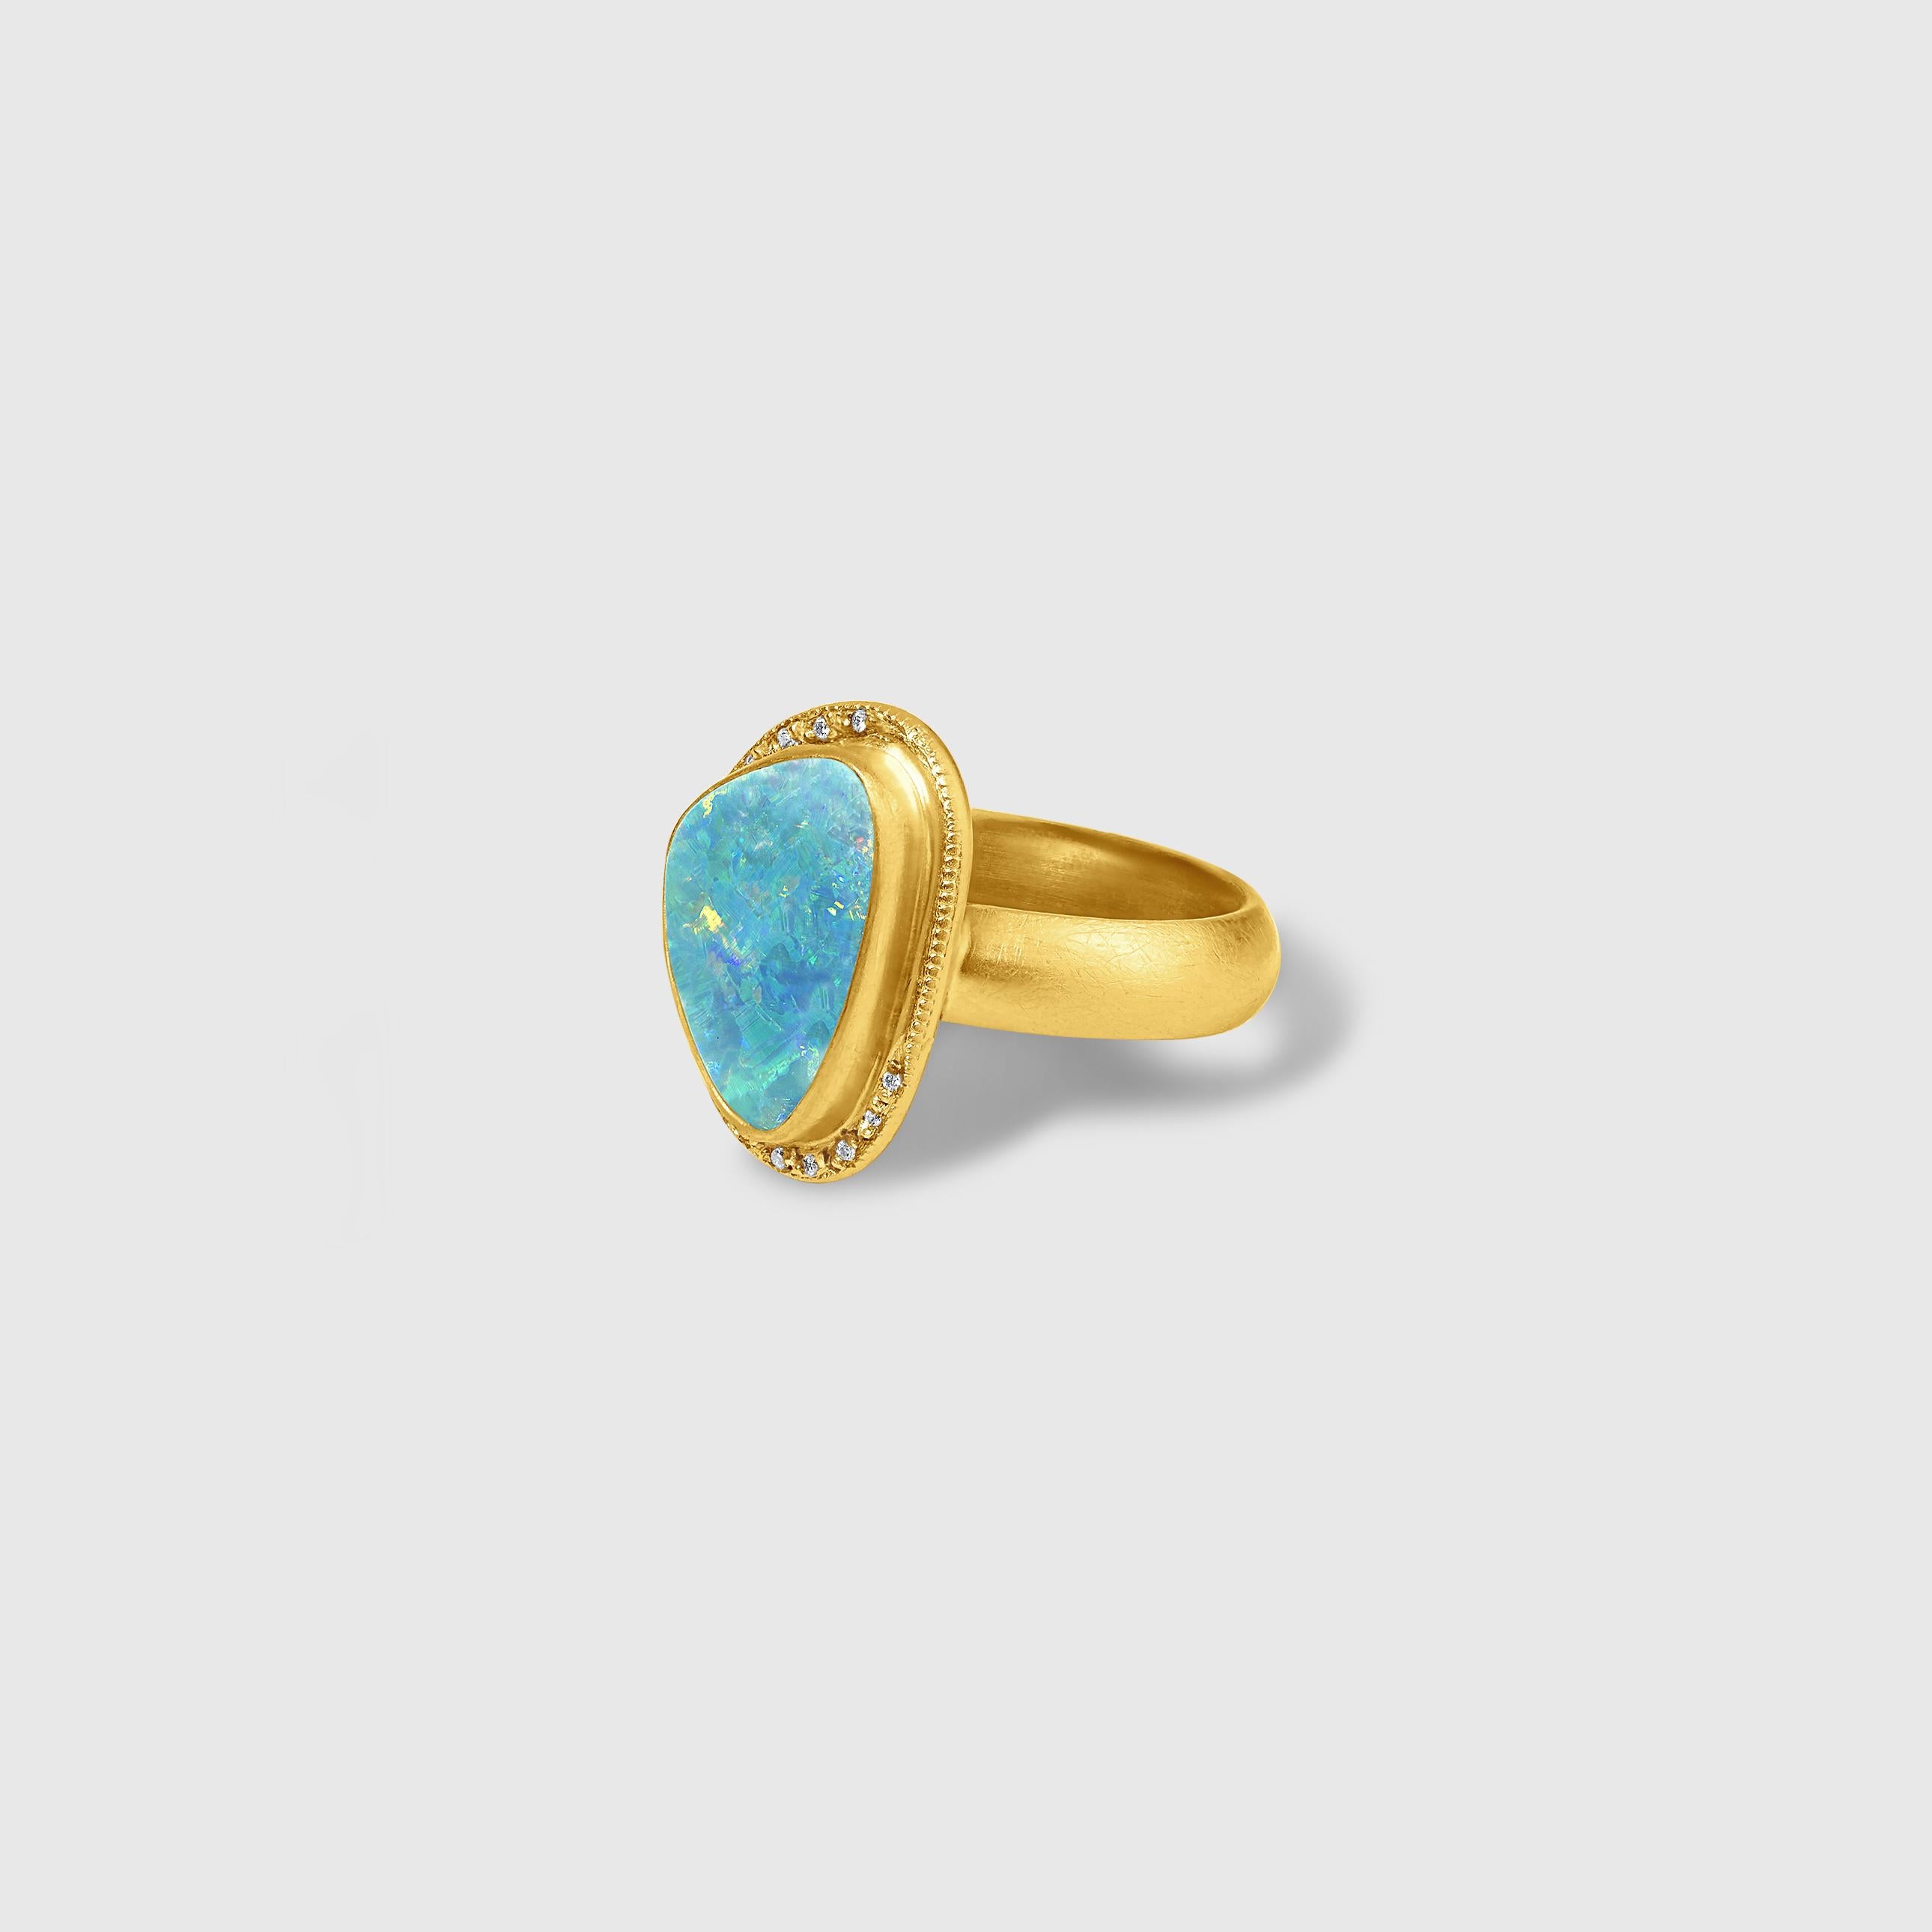 Hanedan Ring with 2.5ct Opal & Diamonds 24 Kt Yellow Gold & Silver by Kurtulan In New Condition For Sale In Bozeman, MT